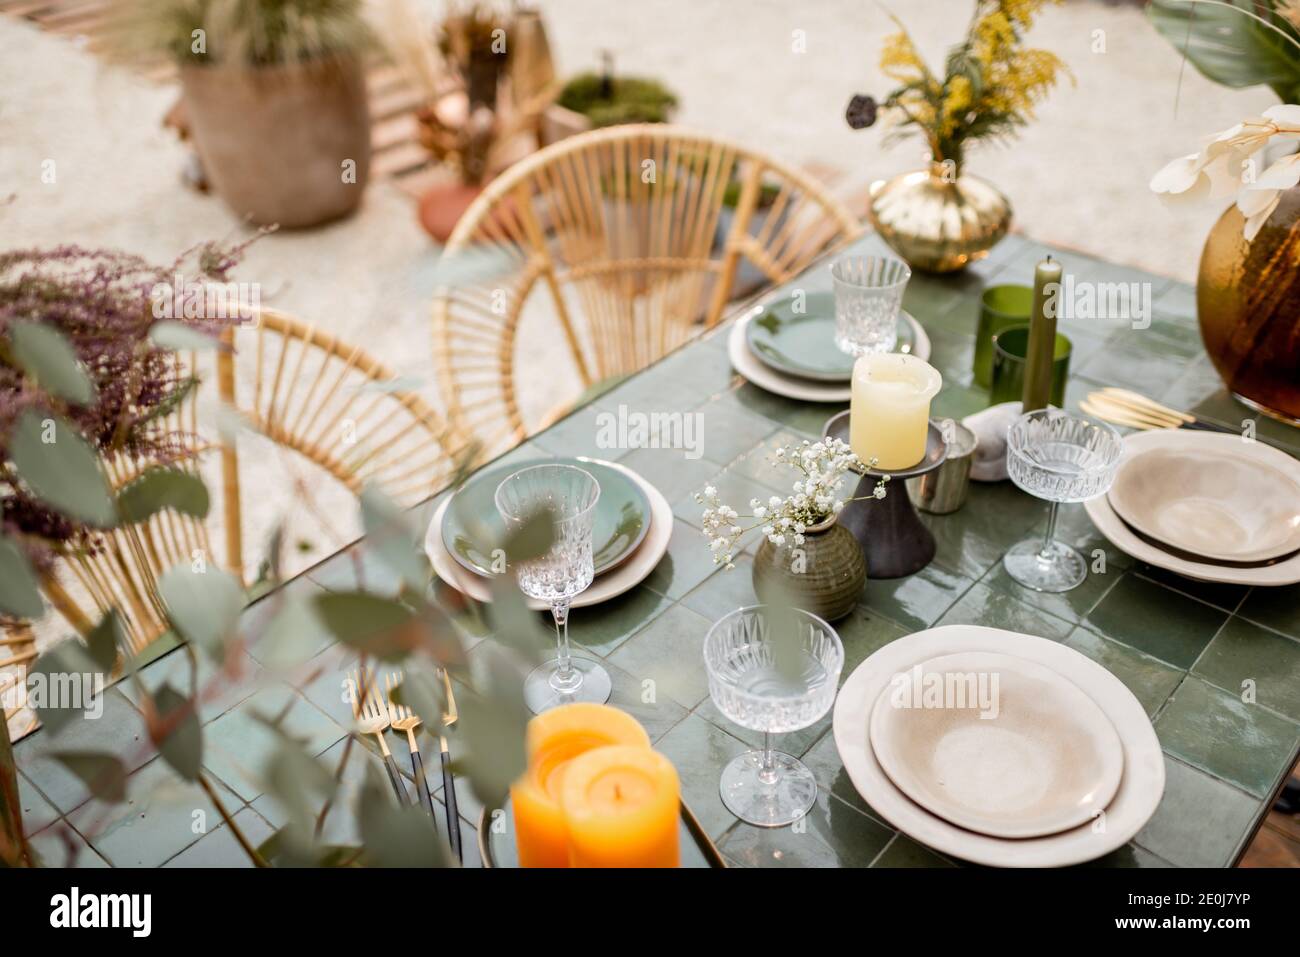 Festively decorated tablescape in green tones with candles, herbs and flowers in a natural Boho style outdoors Stock Photo